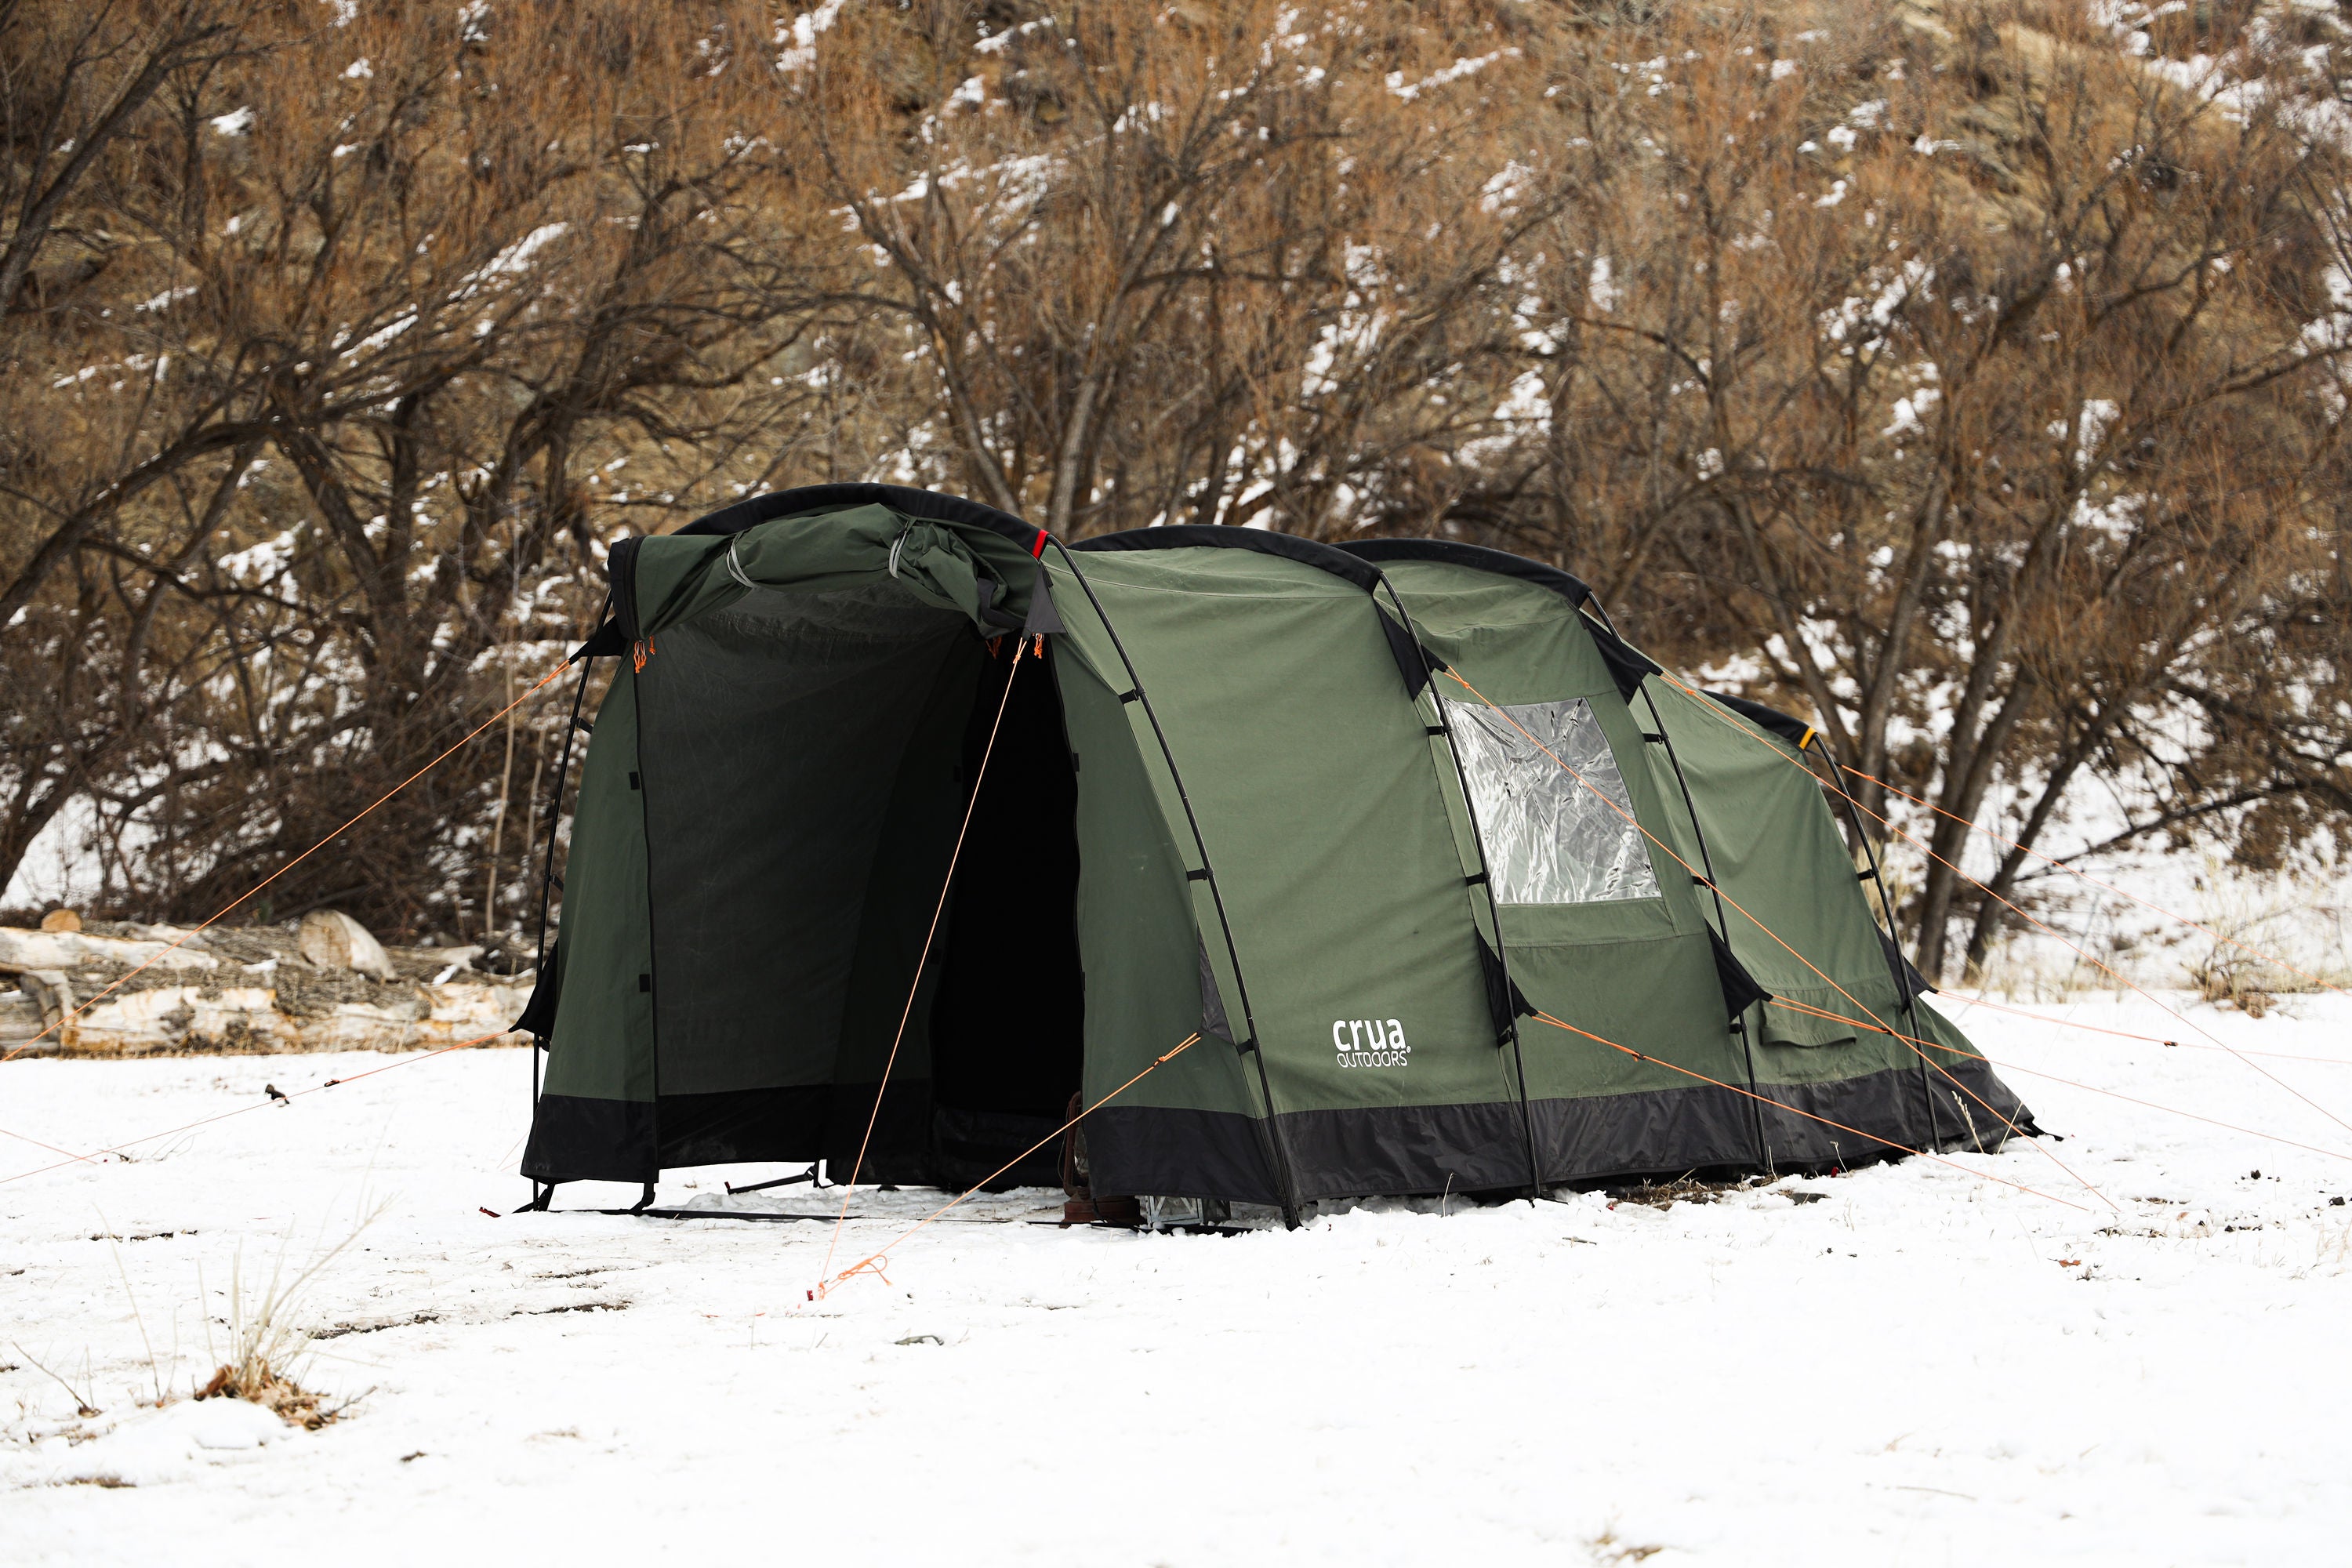 TRI | 3 PERSON INSULATED TUNNEL TENT - ALL WEATHER COMPATIBLE, WATERPROOF, SPACIOUS SHELTER WITH ENHANCED COMFORT AND DURABILITY